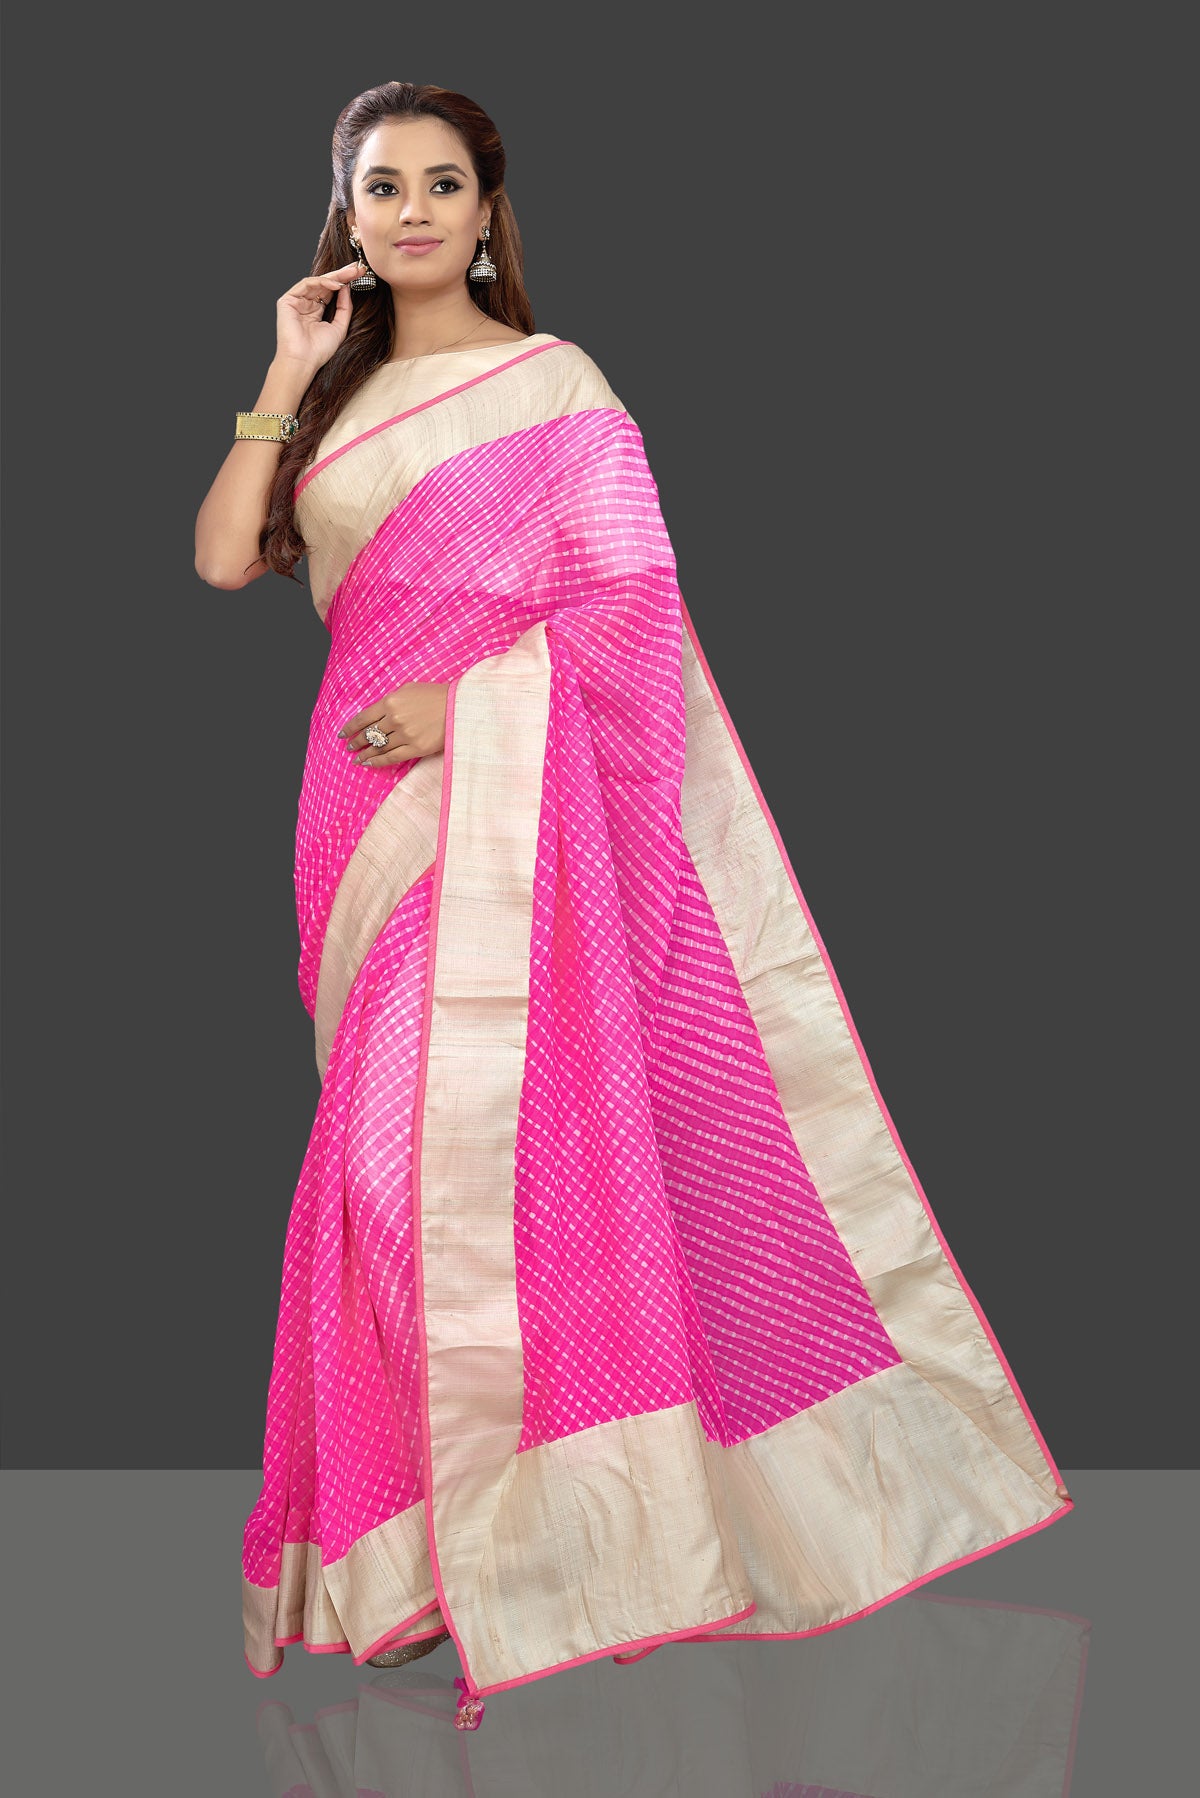 Party wear Cotton Rajasthani Leheriya Saree at Rs 1500/piece in Madanapalle  | ID: 2851452778897